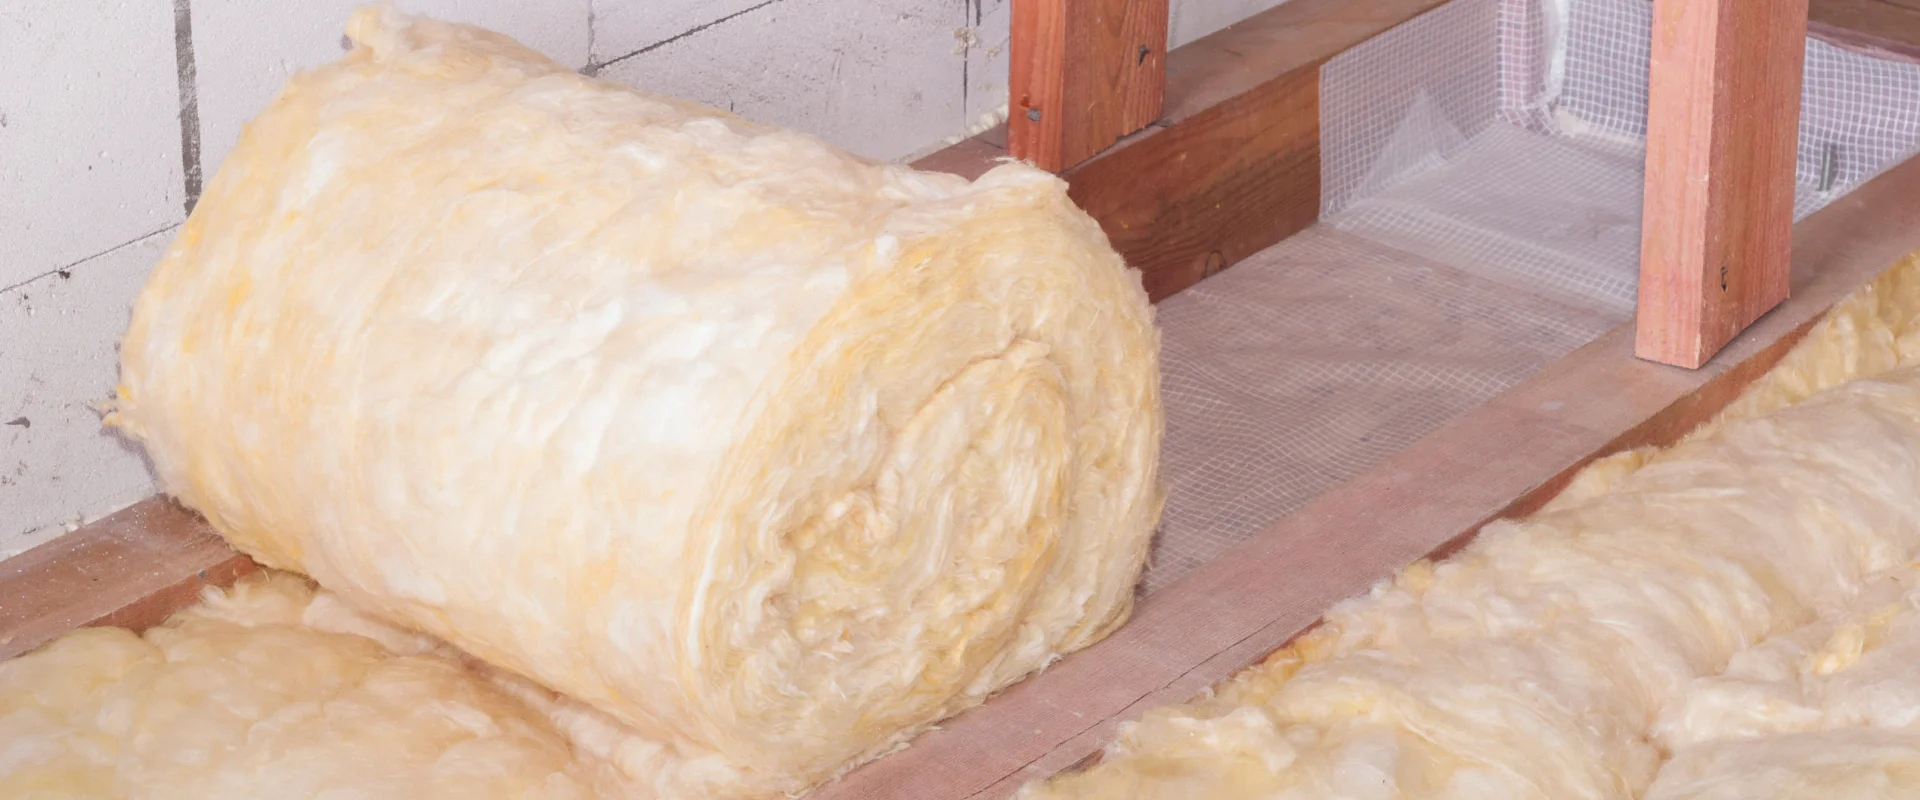 mineral wool insulation work and installation at attic